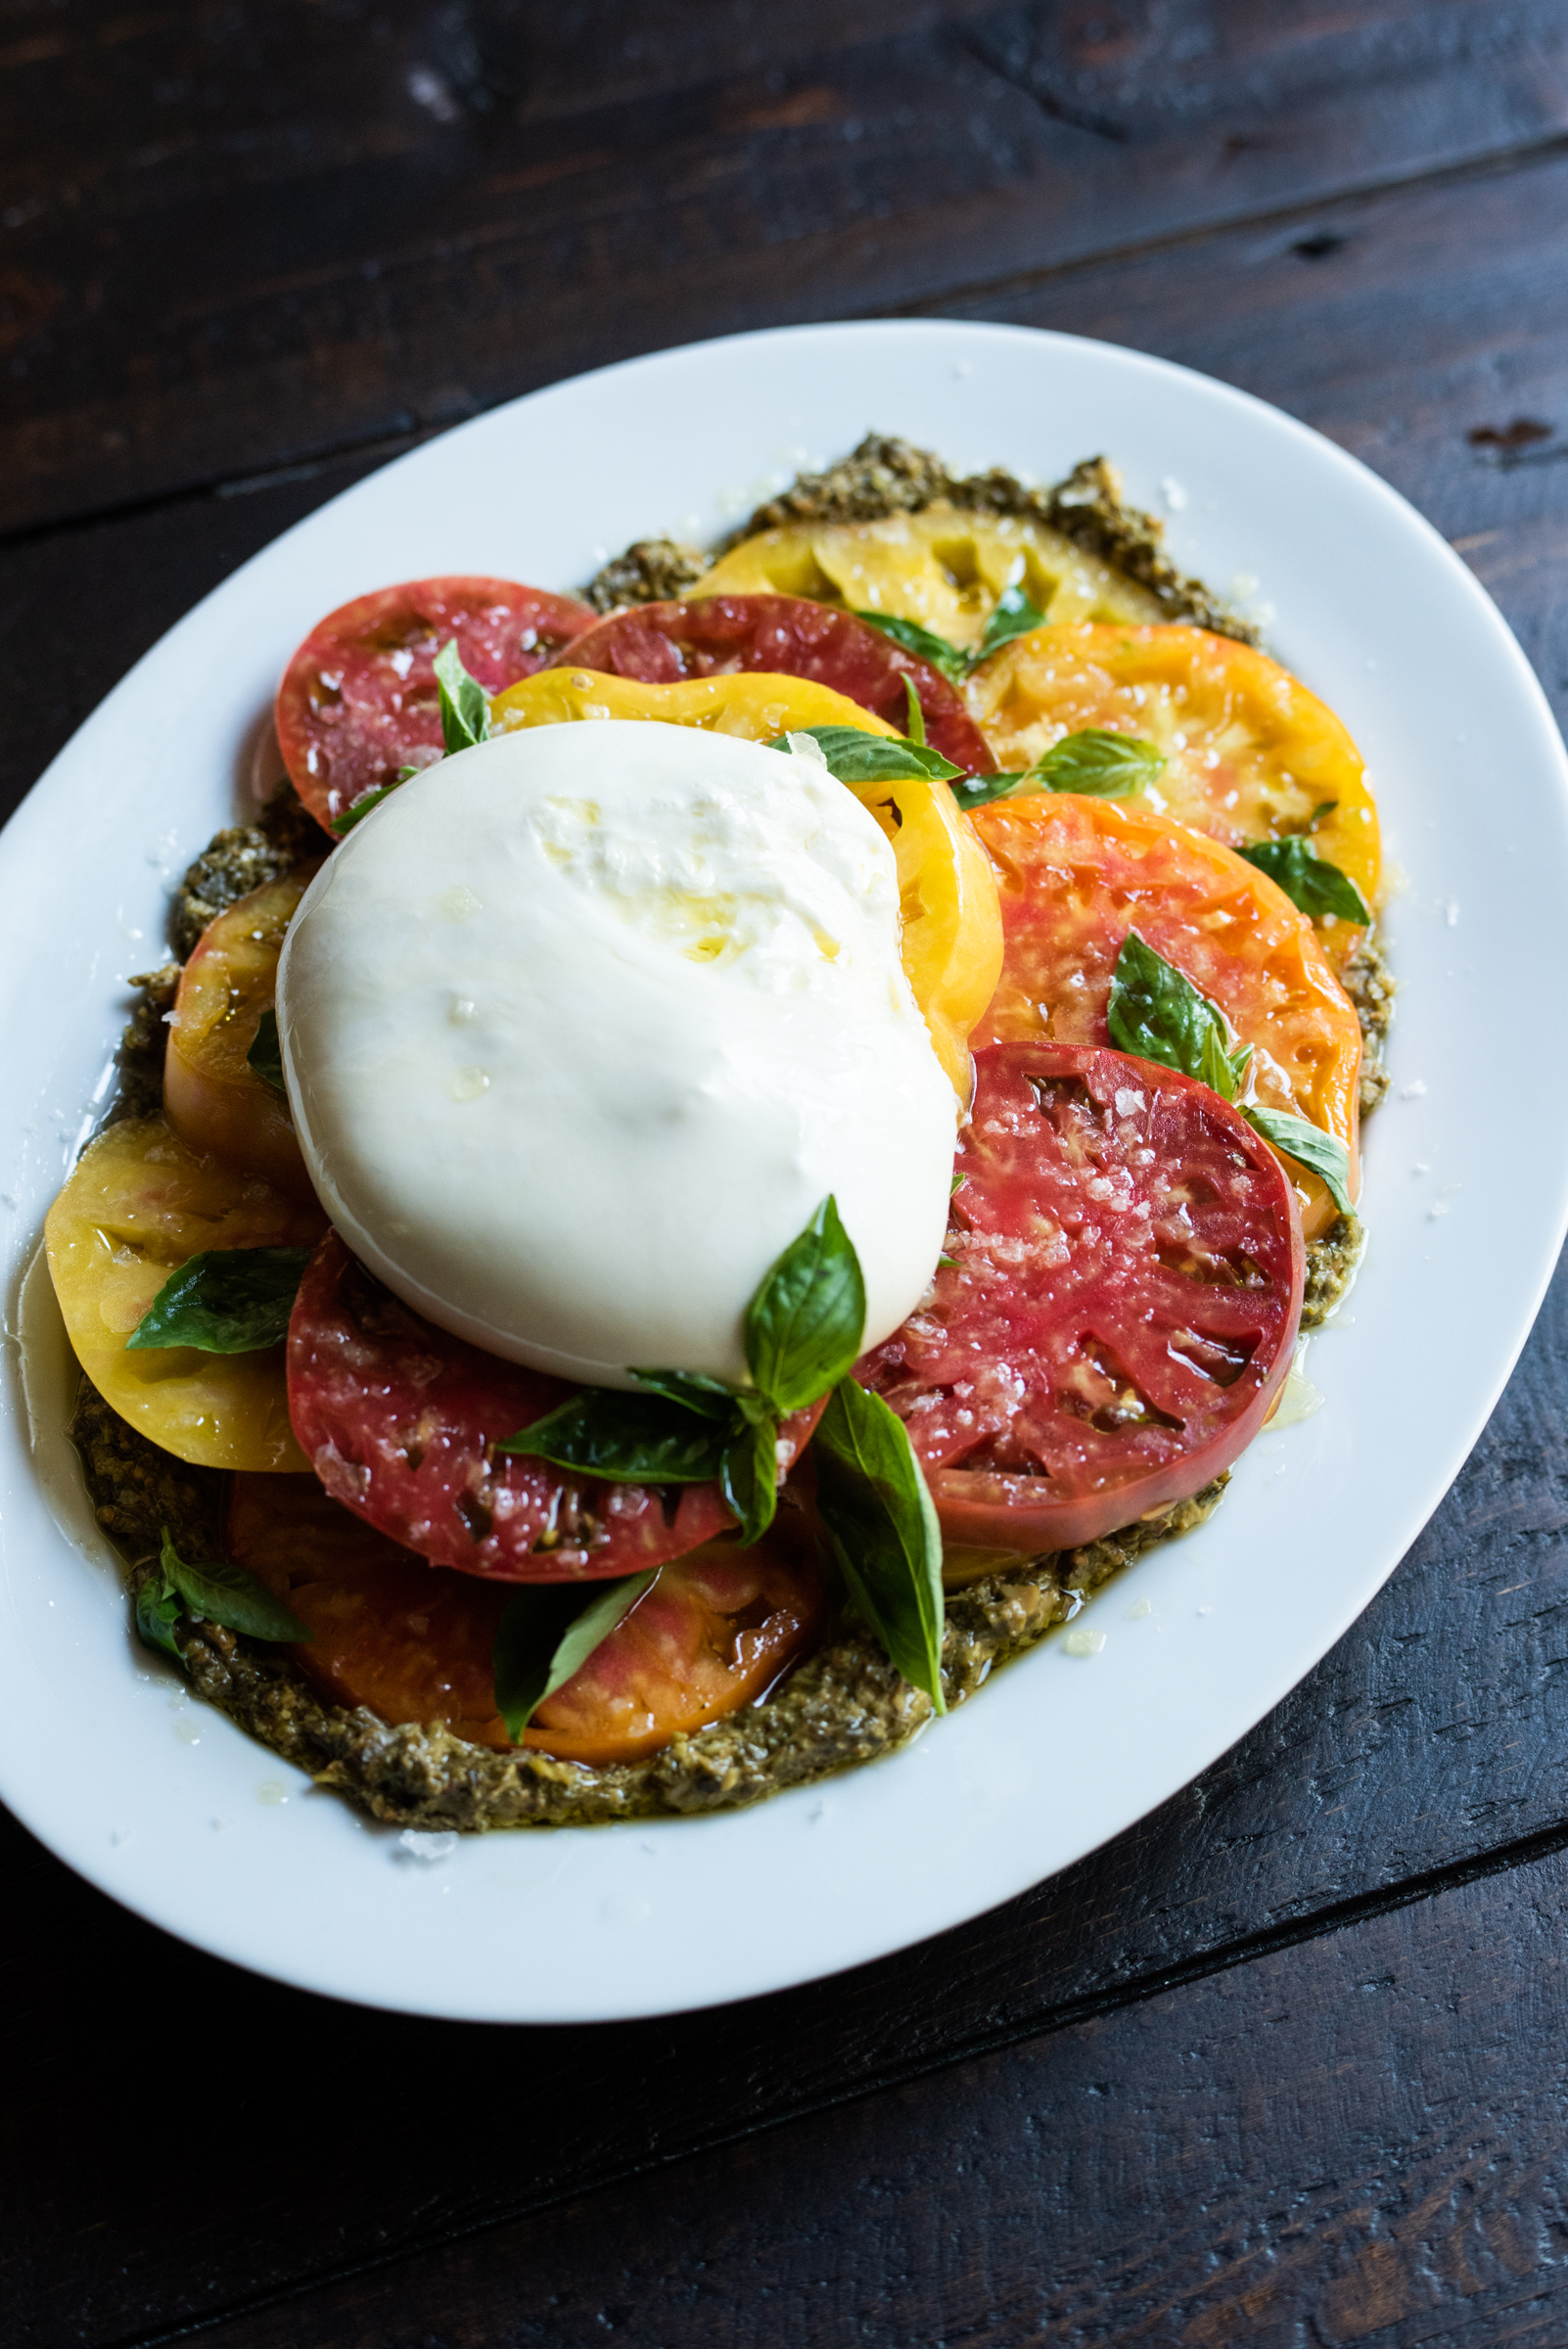 Burrata, heirloom tomatoes and pesto with olive oil